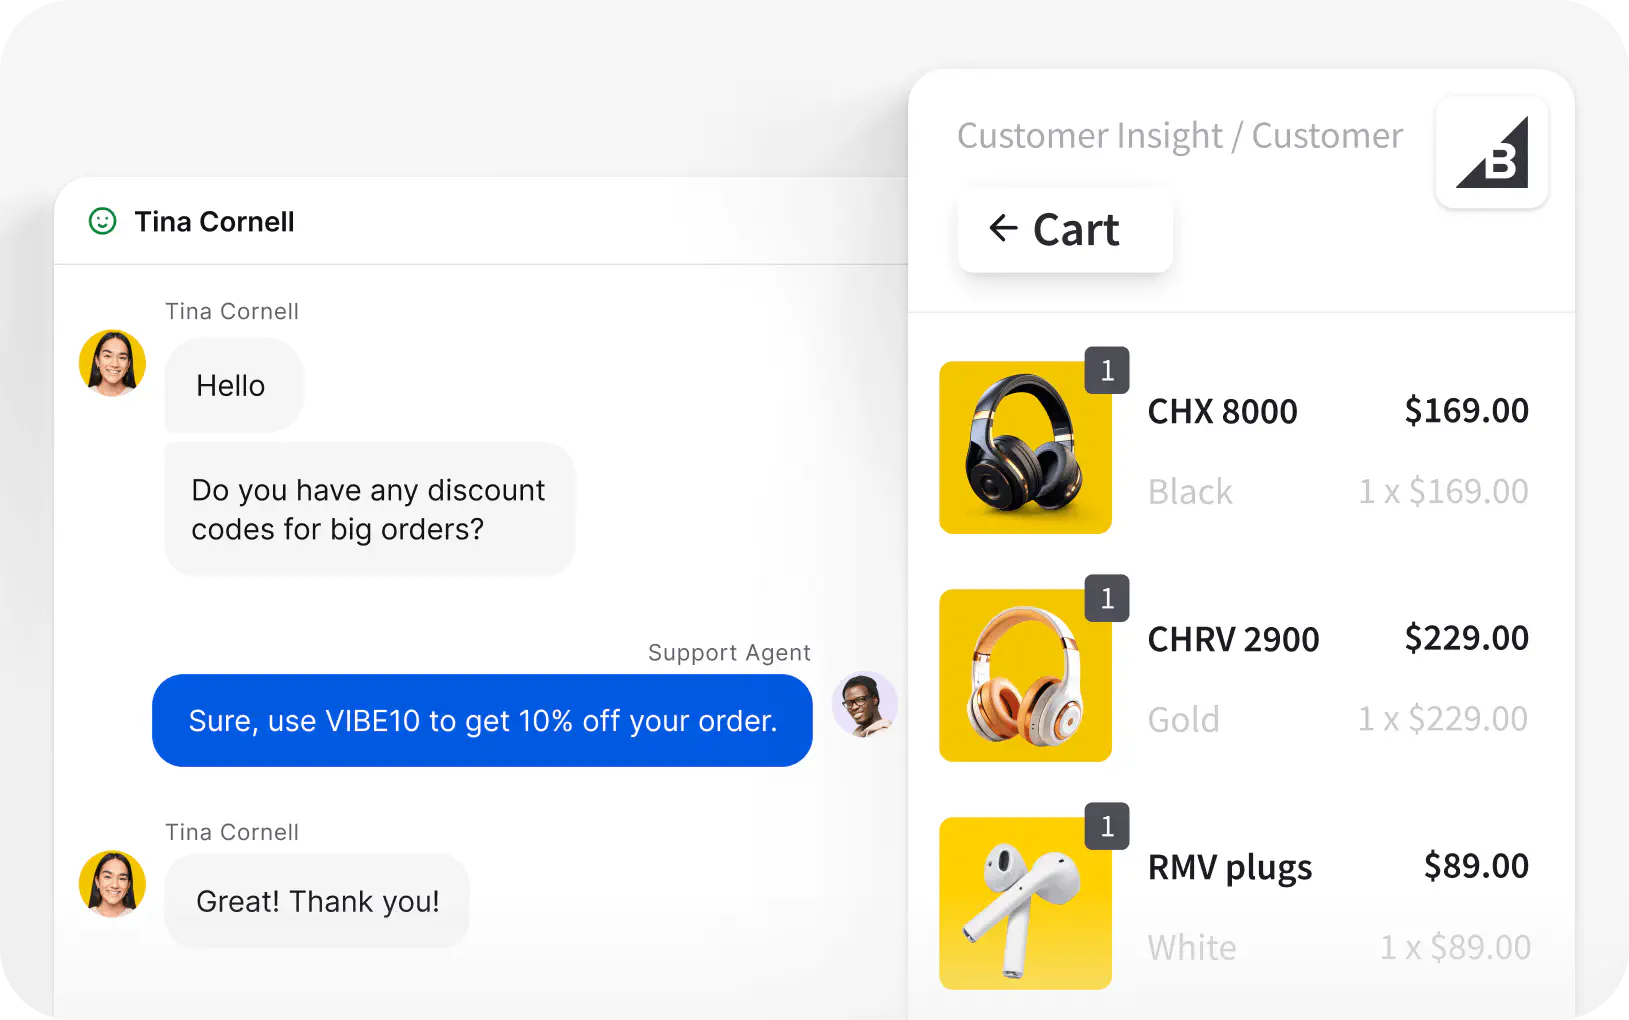 Customer details and cart preview in live chat